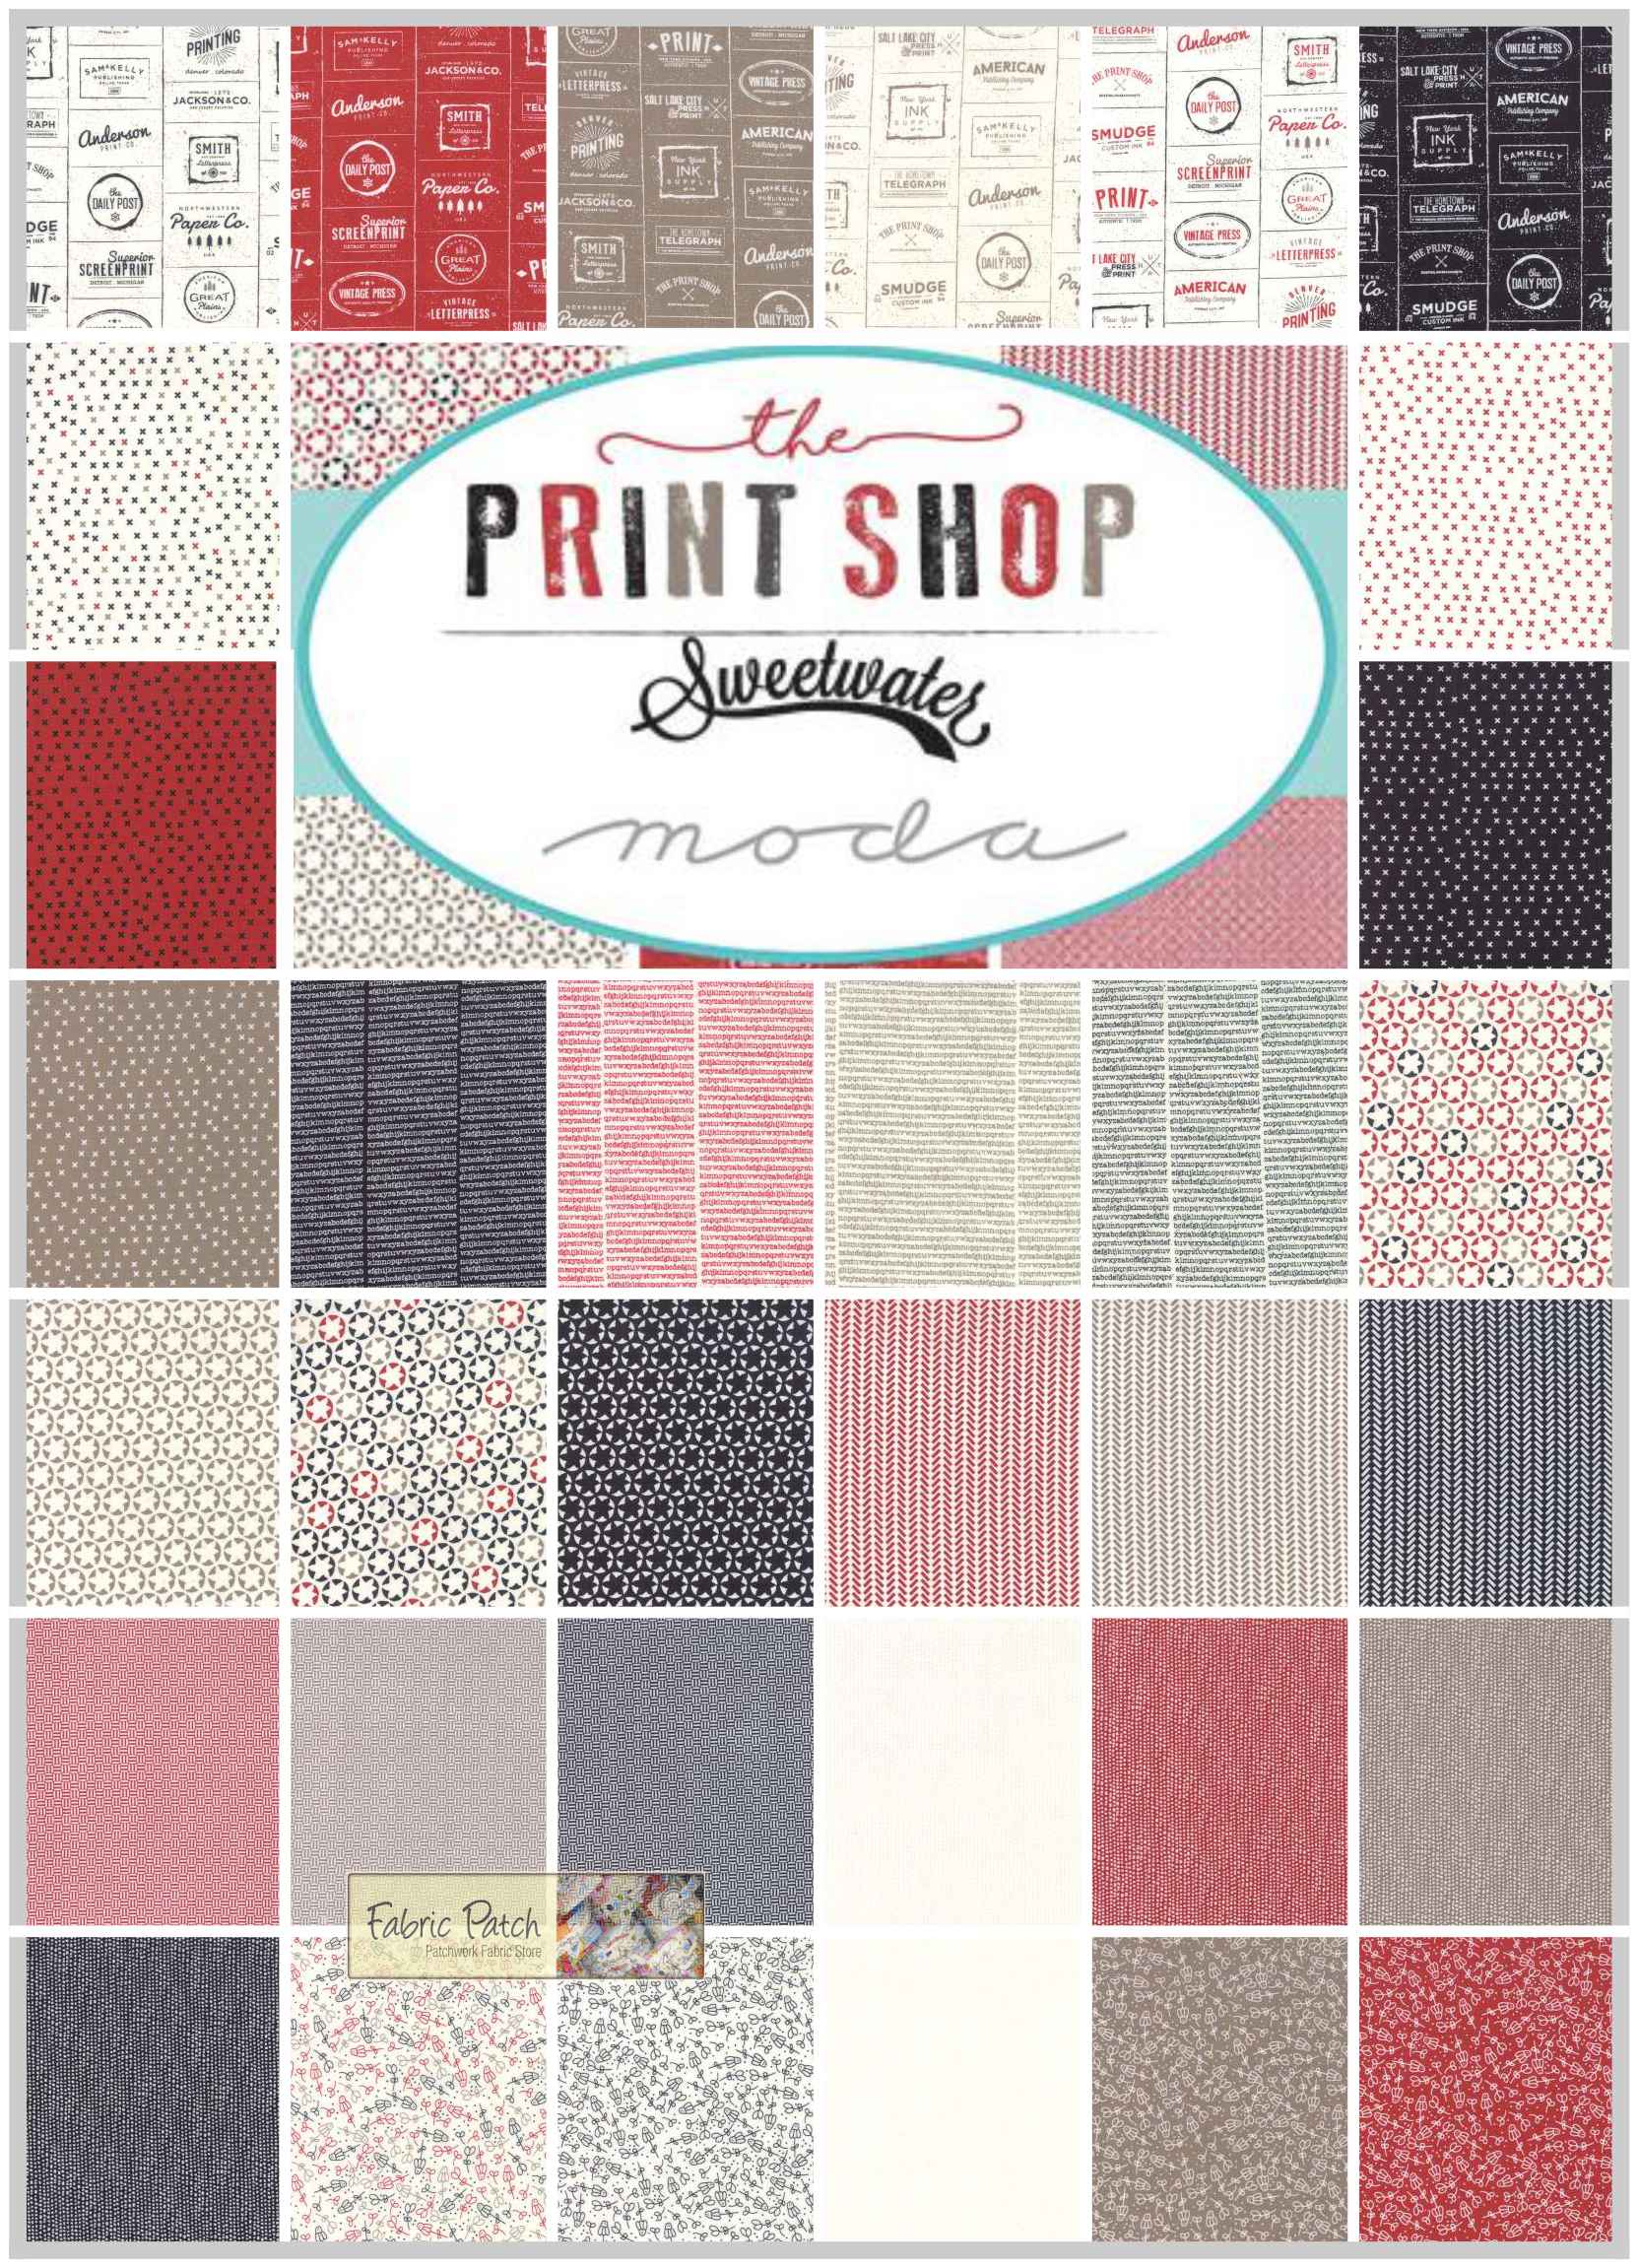 The Print Shop jelly roll by Sweetwater for moda fabrics - Patchwork Quilting Fabric